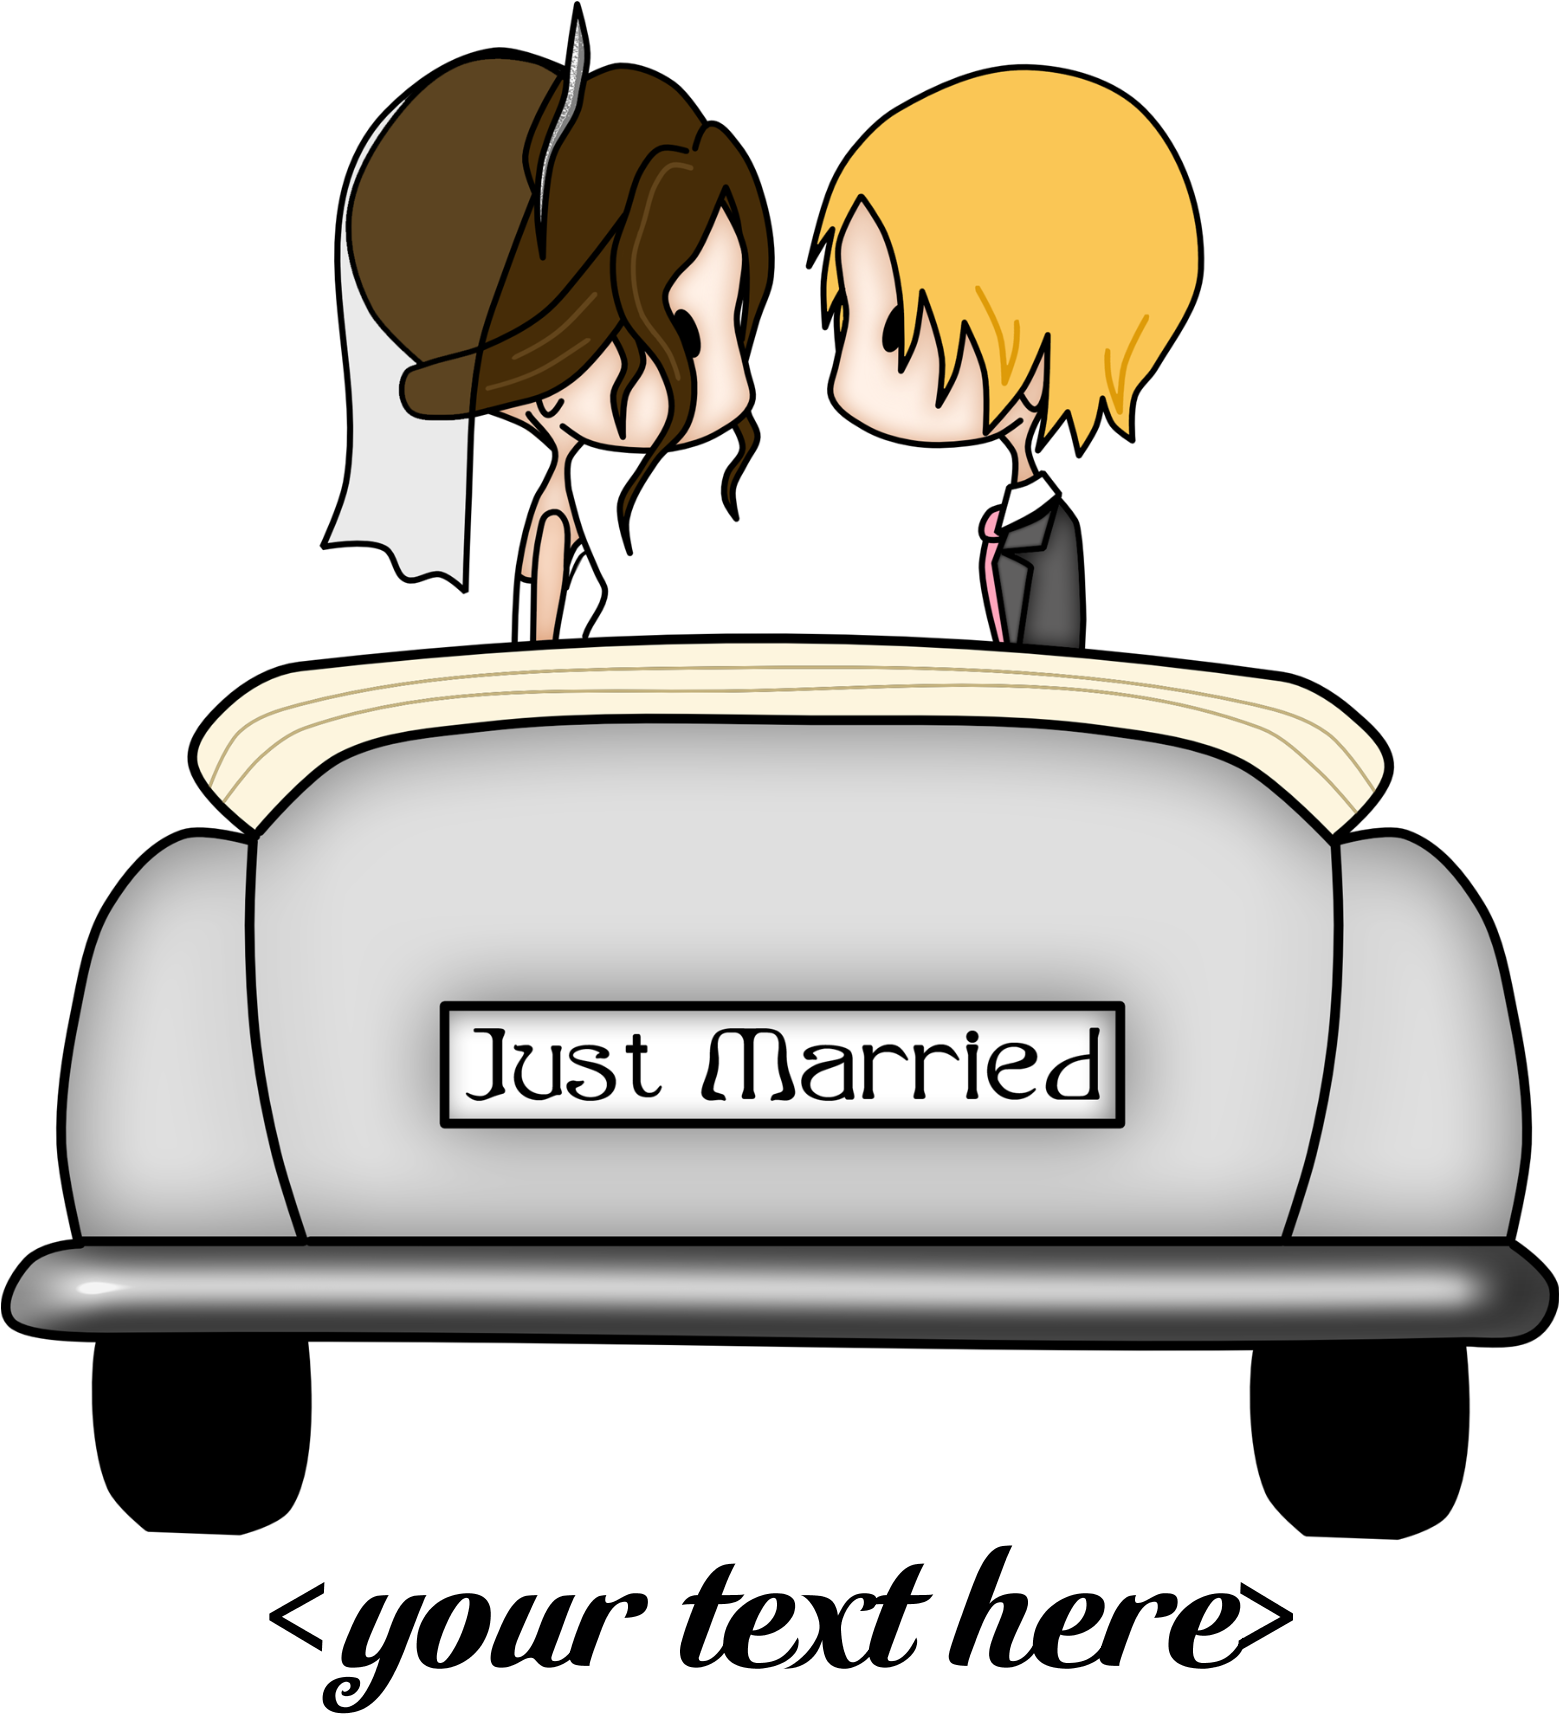 Just Married Car Png Clipart - Just Married, Bride And Groom Weddi Round .....